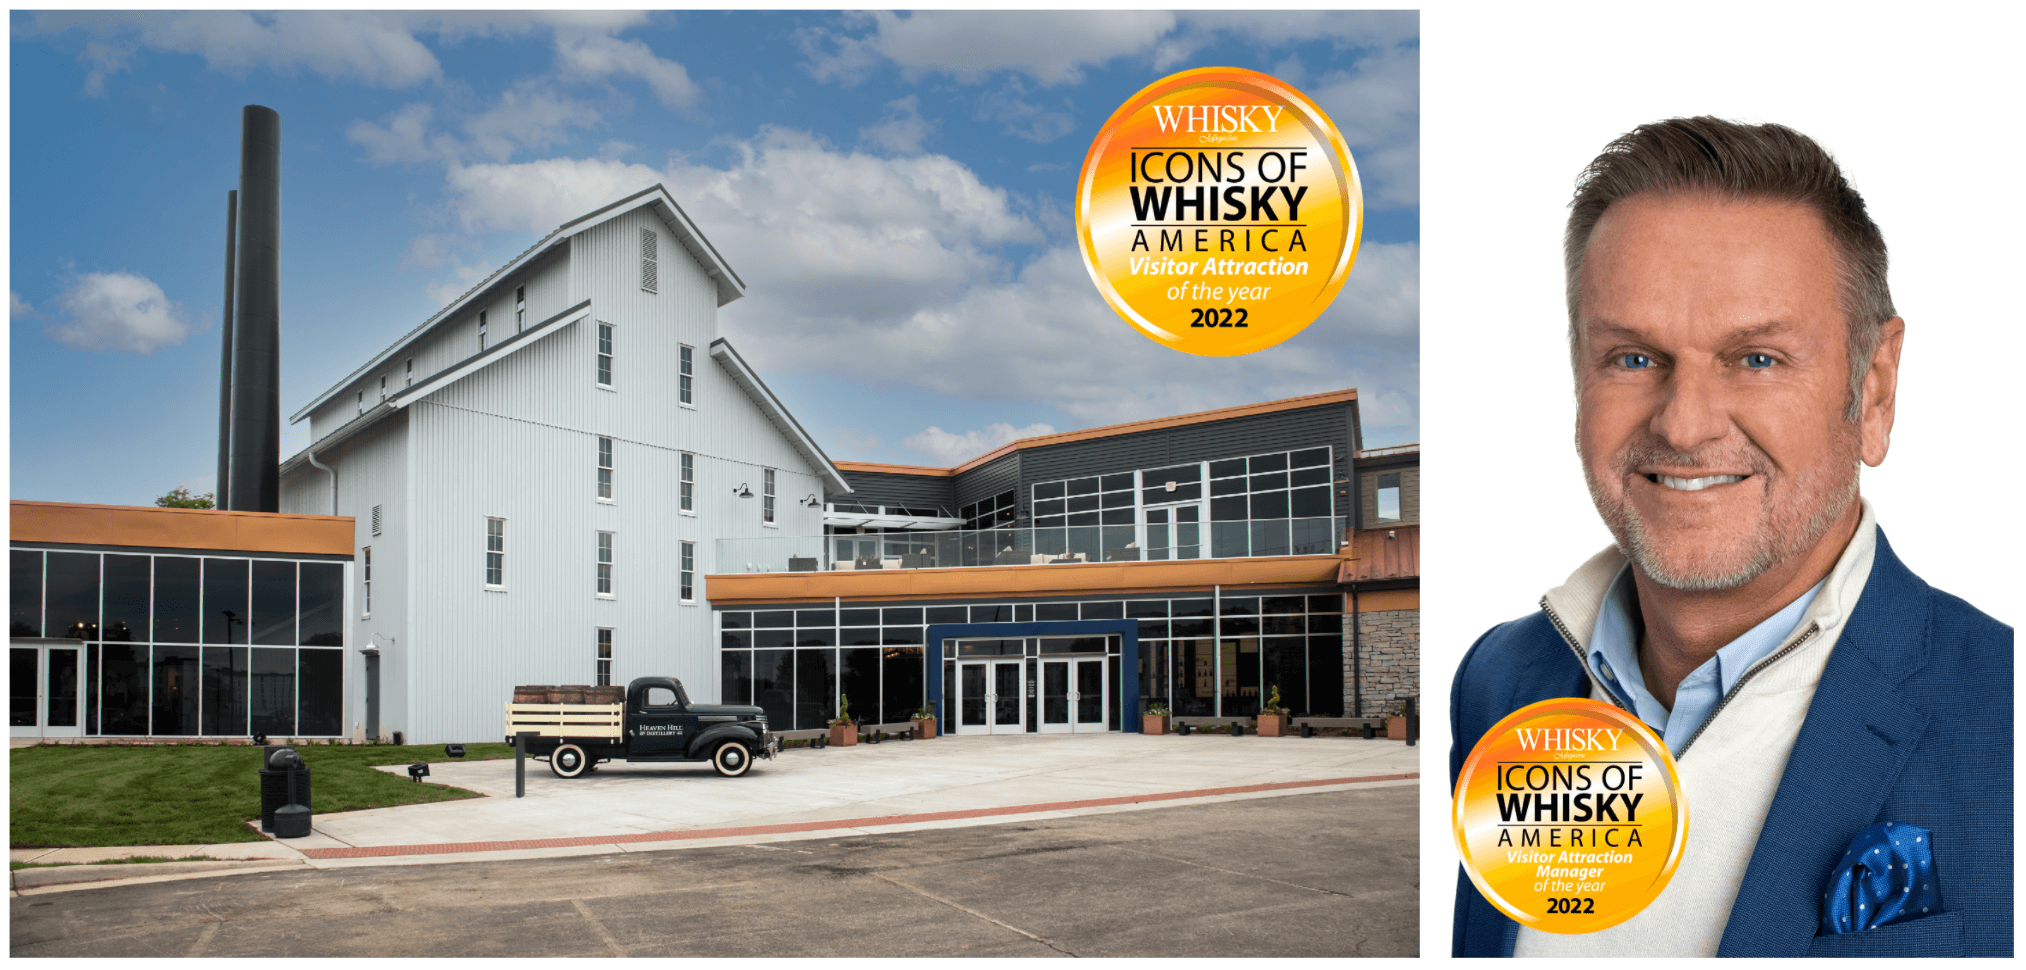 Screen Shot 2022 02 11 at 1.17.47 PM - Heaven Hill Distillery Wins Top Awards from 2022 American Icons of Whisky